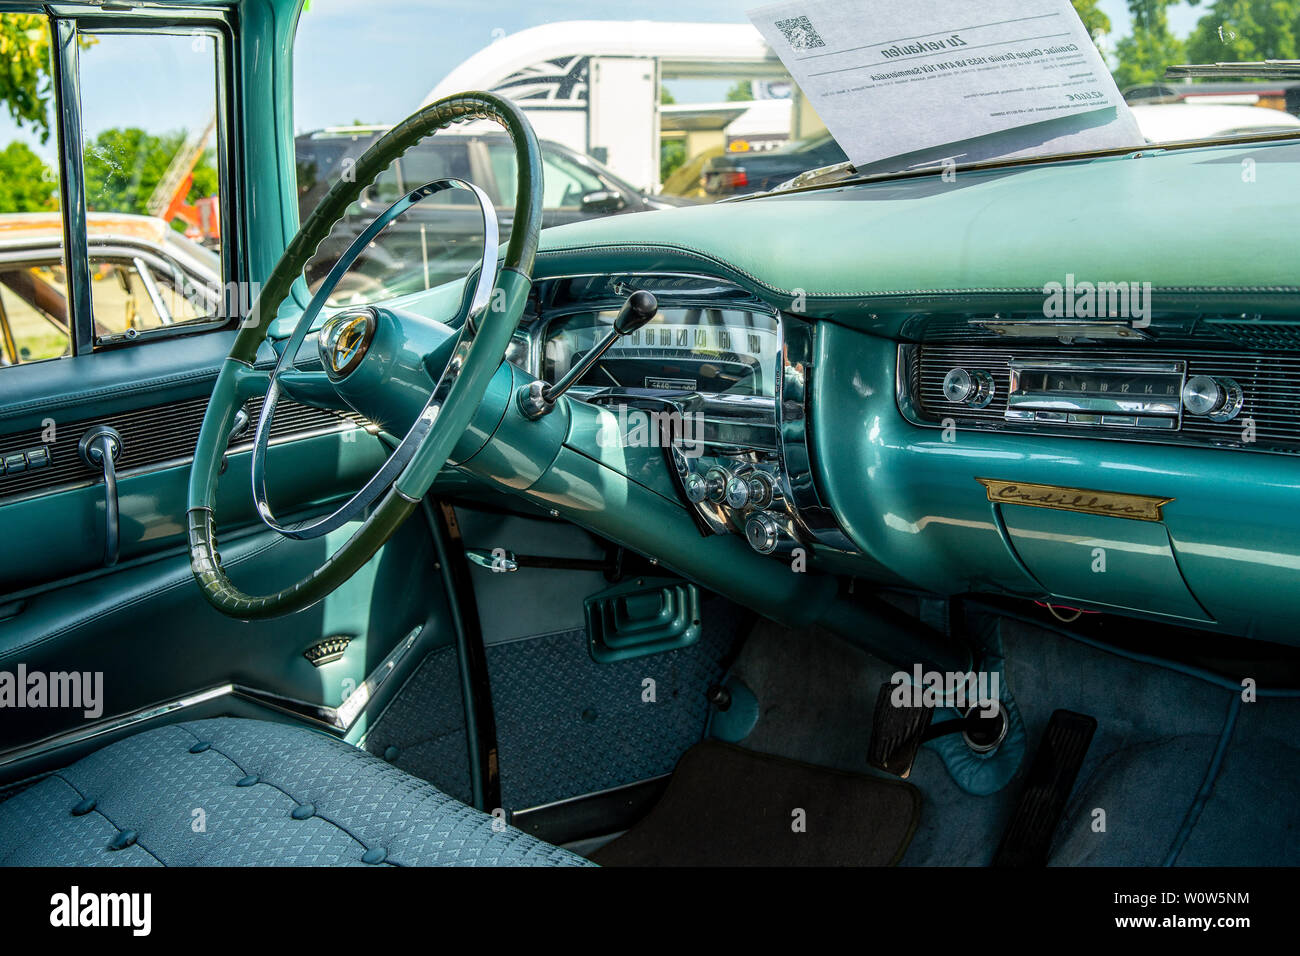 PAAREN IM GLIEN, GERMANY - MAY 19, 2018: Interior of  a full-size luxury car Cadillac Series 62 Coupe de Ville, 1955. Die Oldtimer Show 2018. Stock Photo